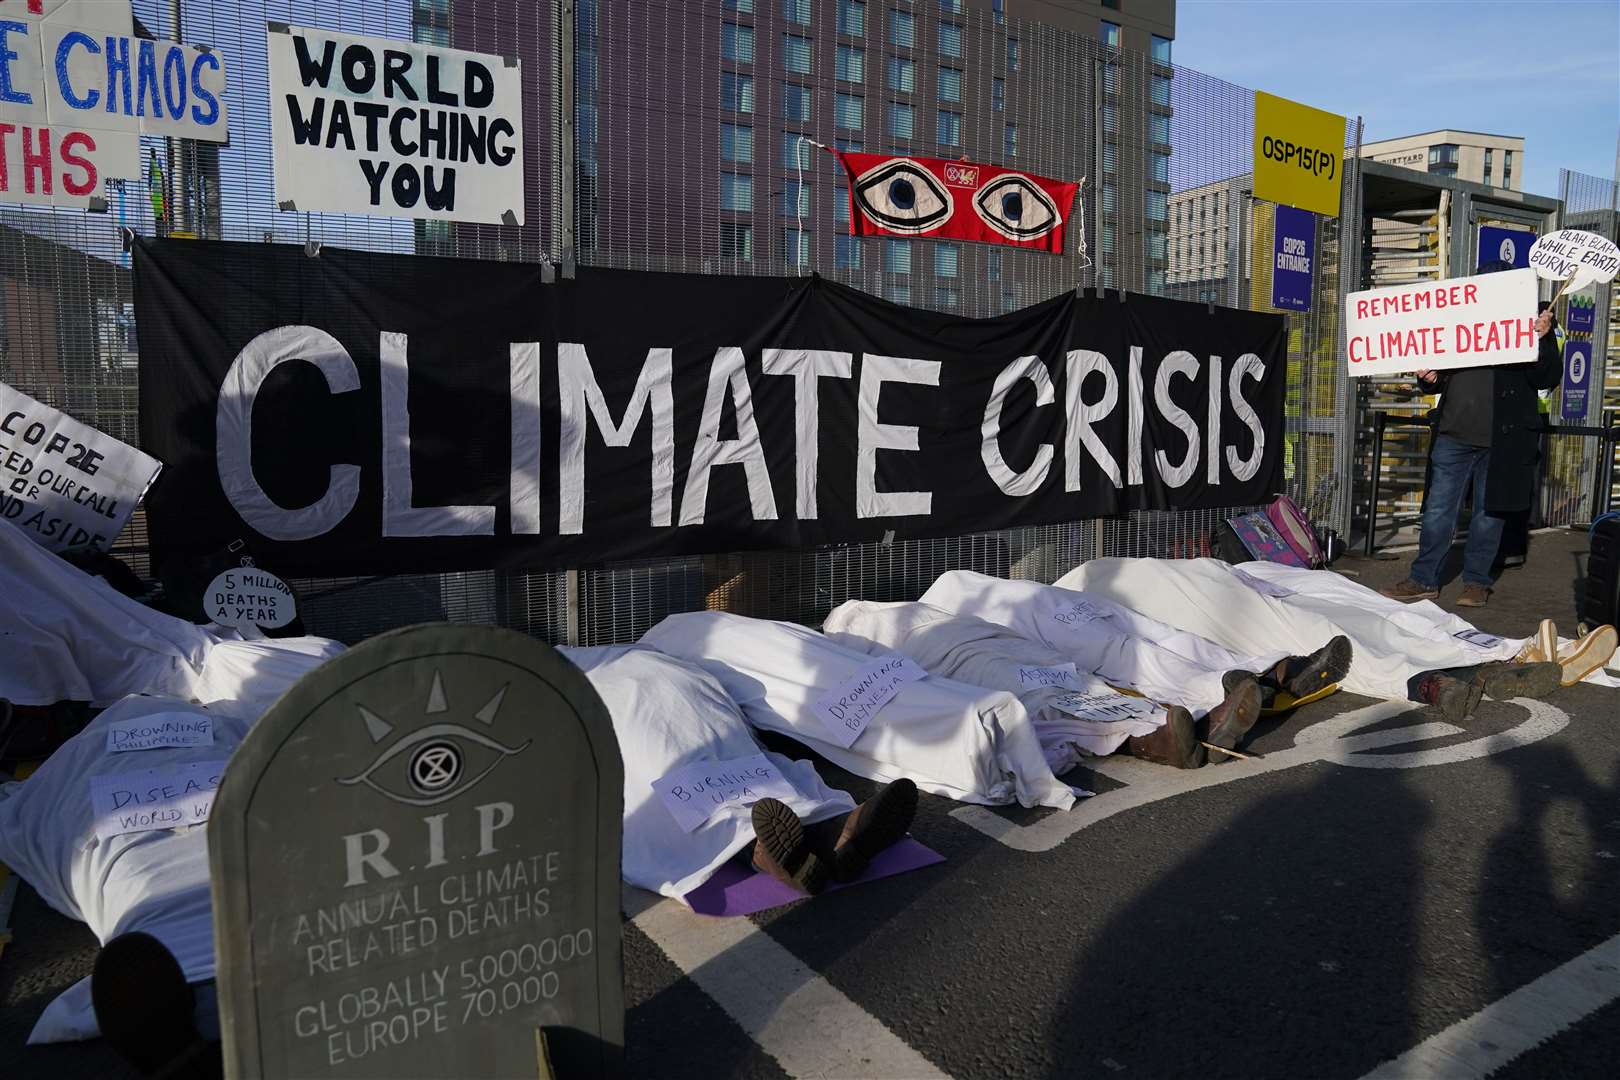 Climate protesters stage a die-in protest outside the Cop26 venue (Andrew Milligan/PA)